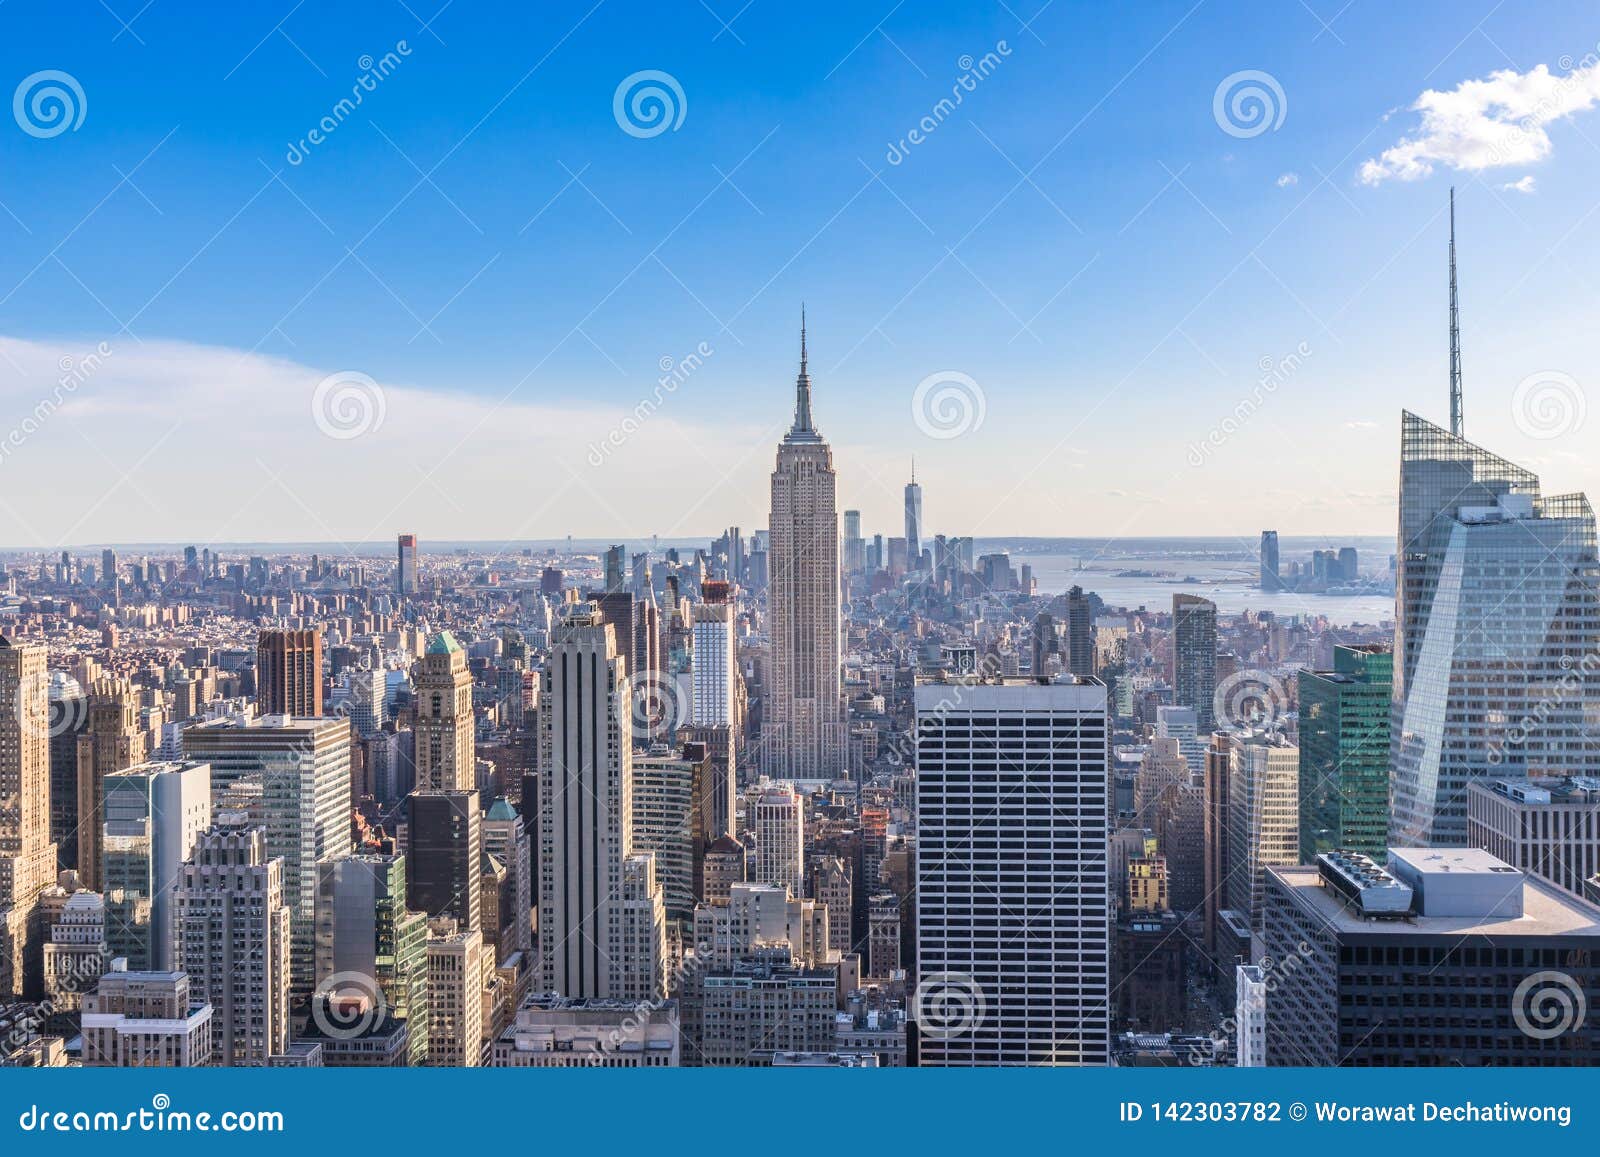 new york city skyline in manhattan downtown with empire state building and skyscrapers on sunny day with clear blue sky usa